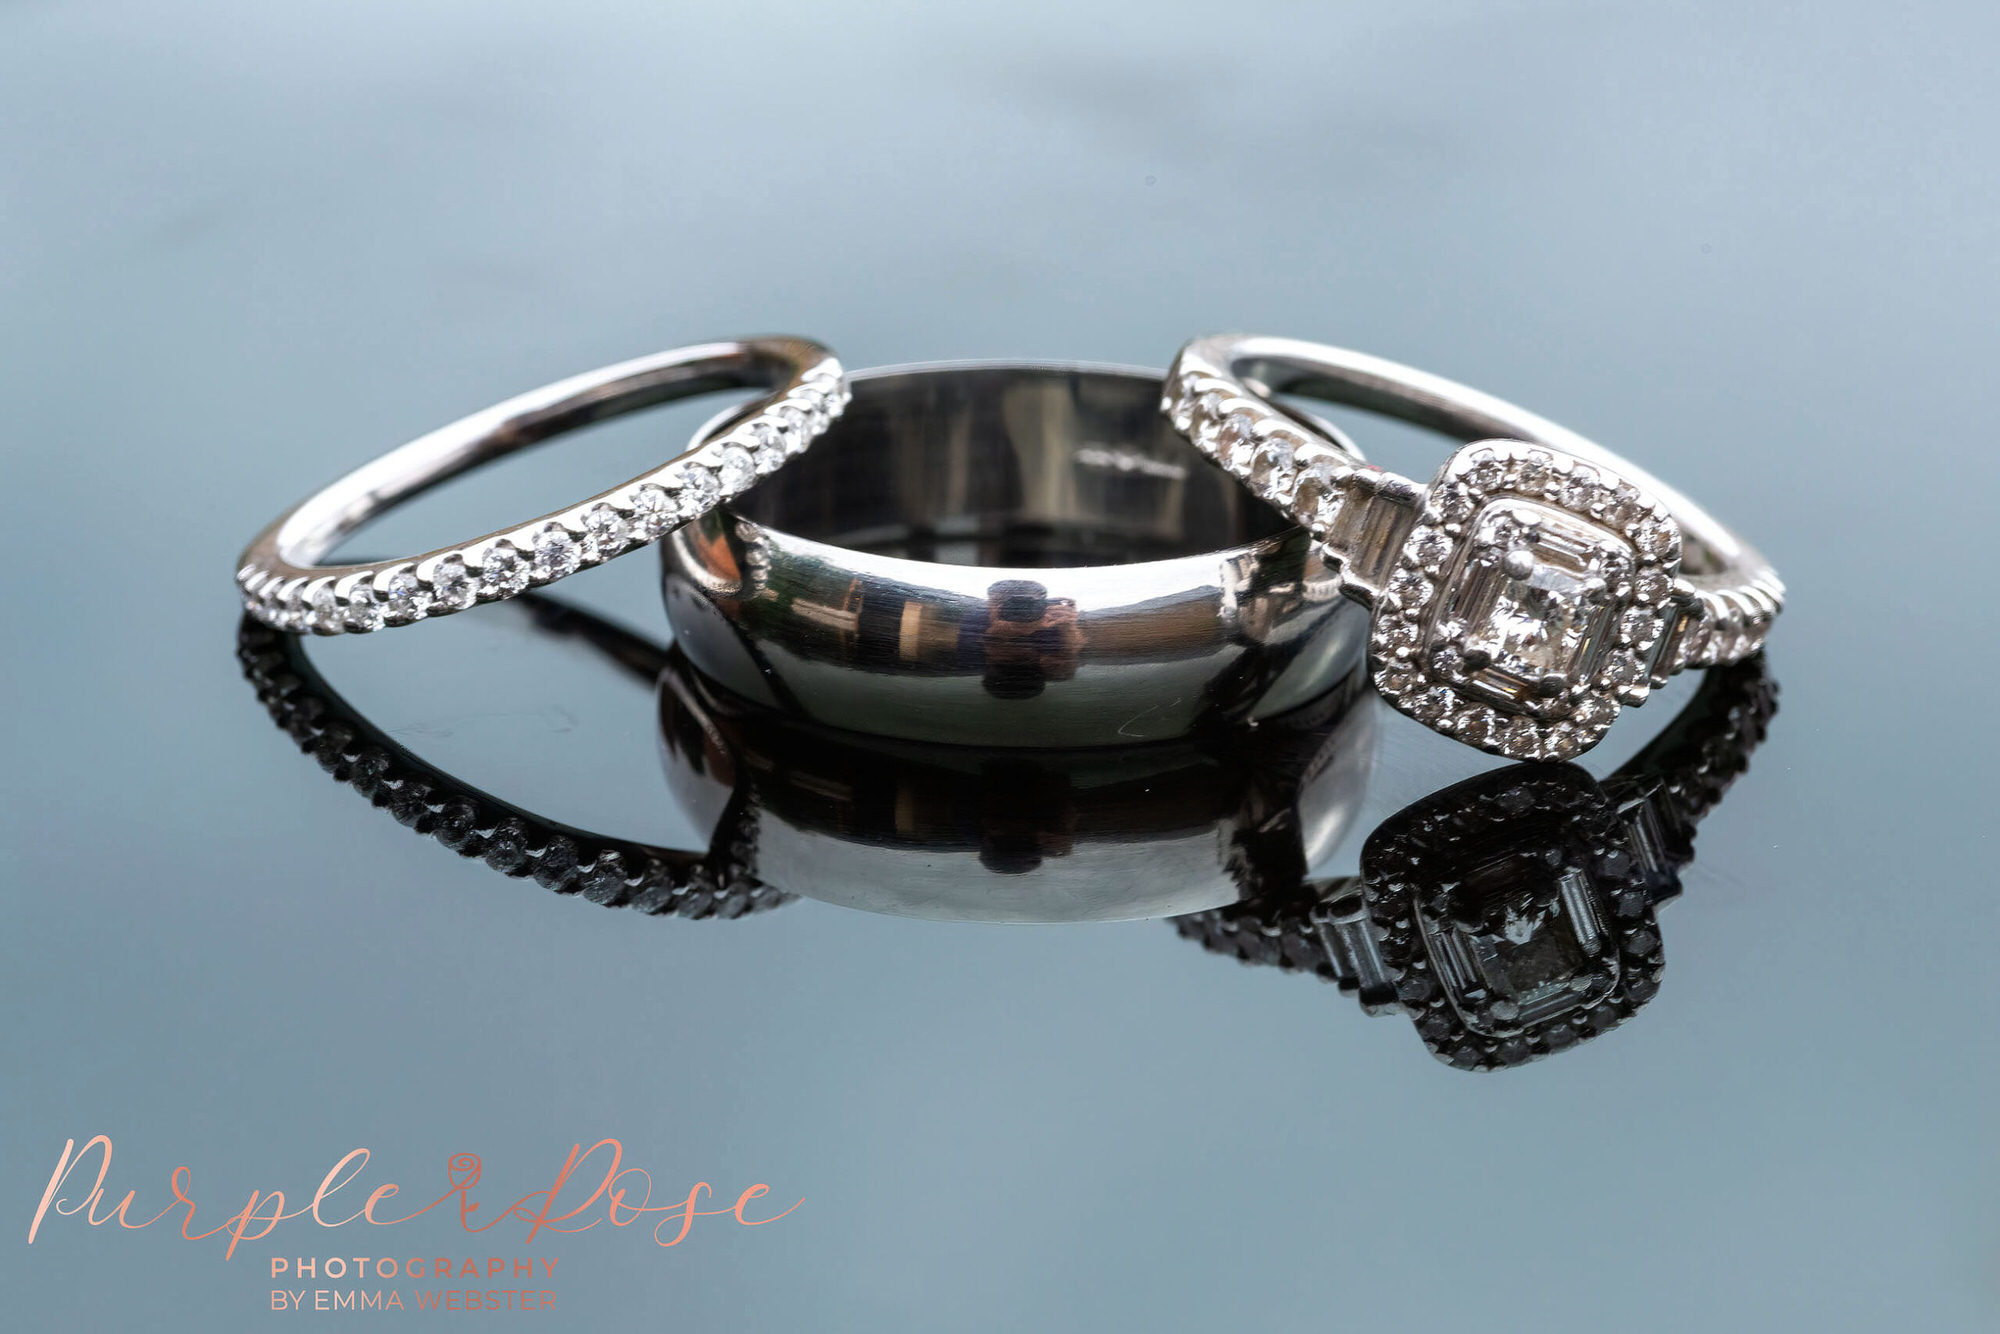 Weddign rings and engagement rings on a reflective surface